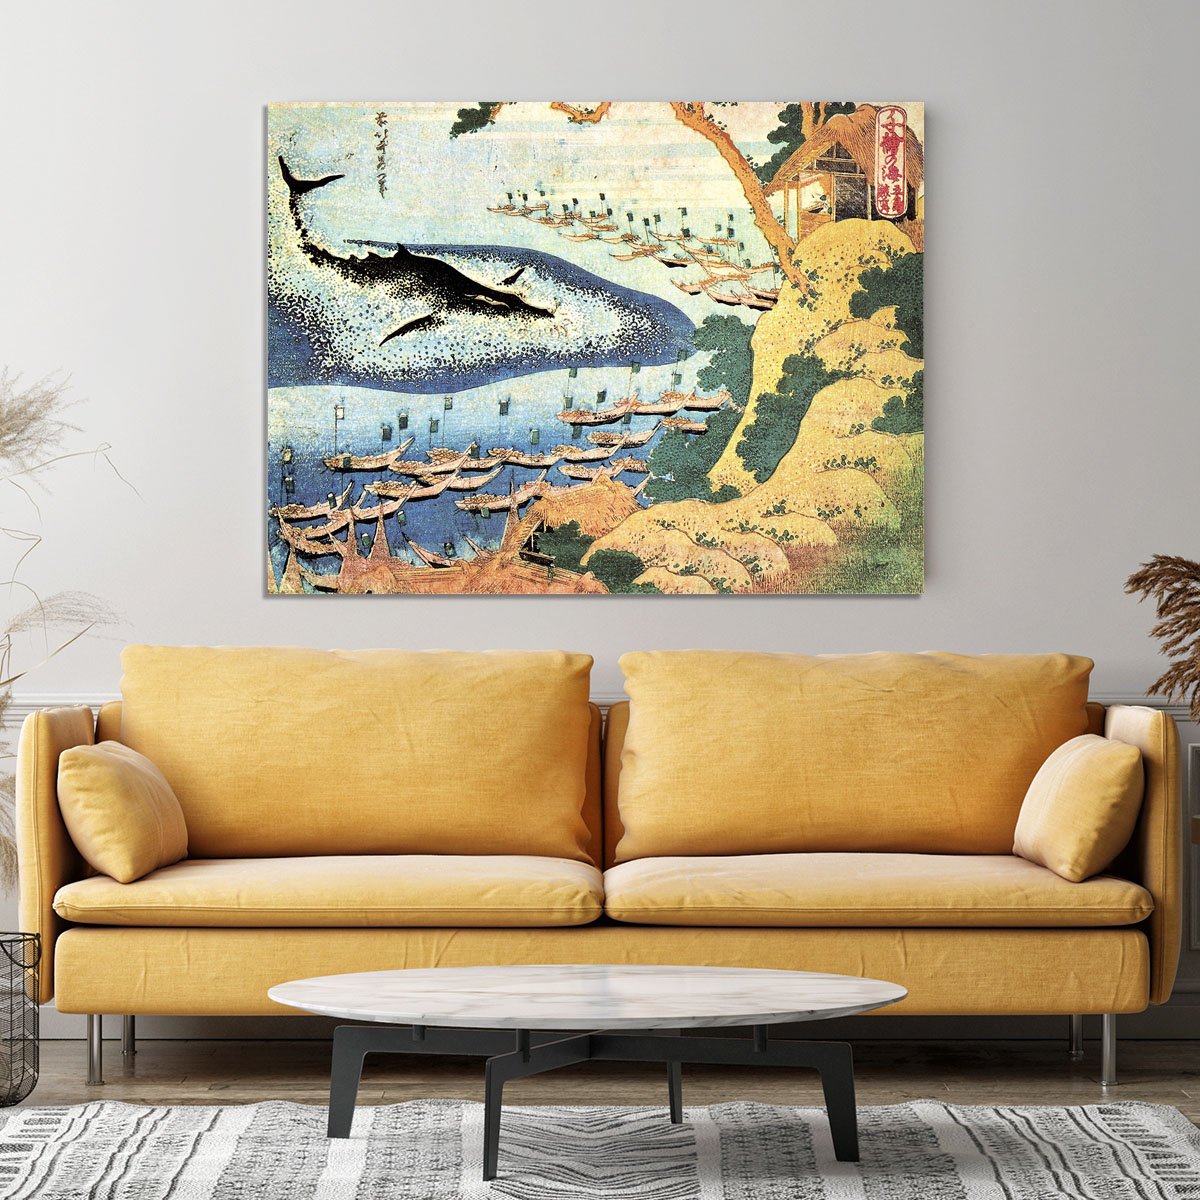 Ocean landscape and whale by Hokusai Canvas Print or Poster